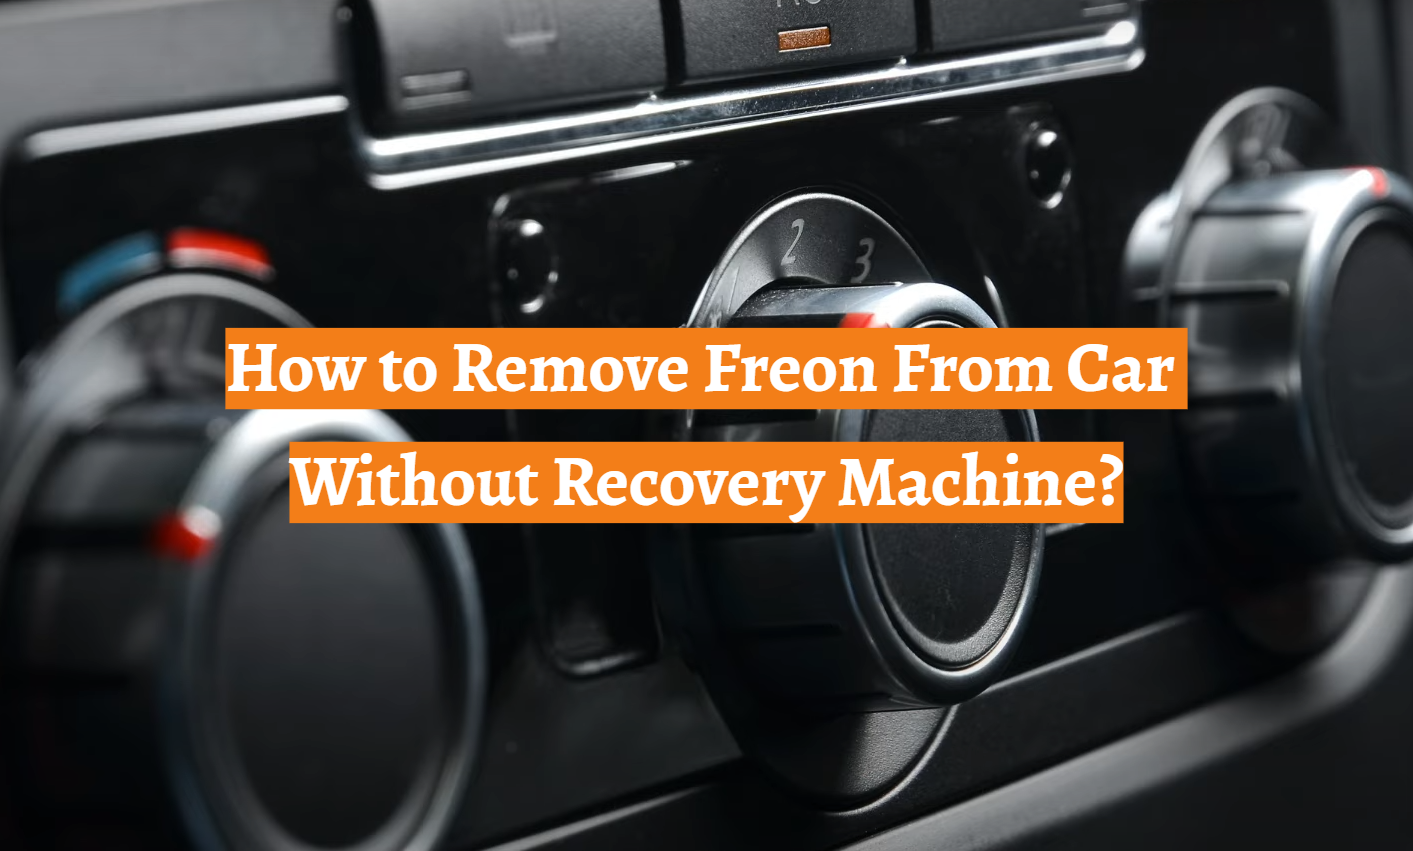 How to Remove Freon From Car Without Recovery Machine?